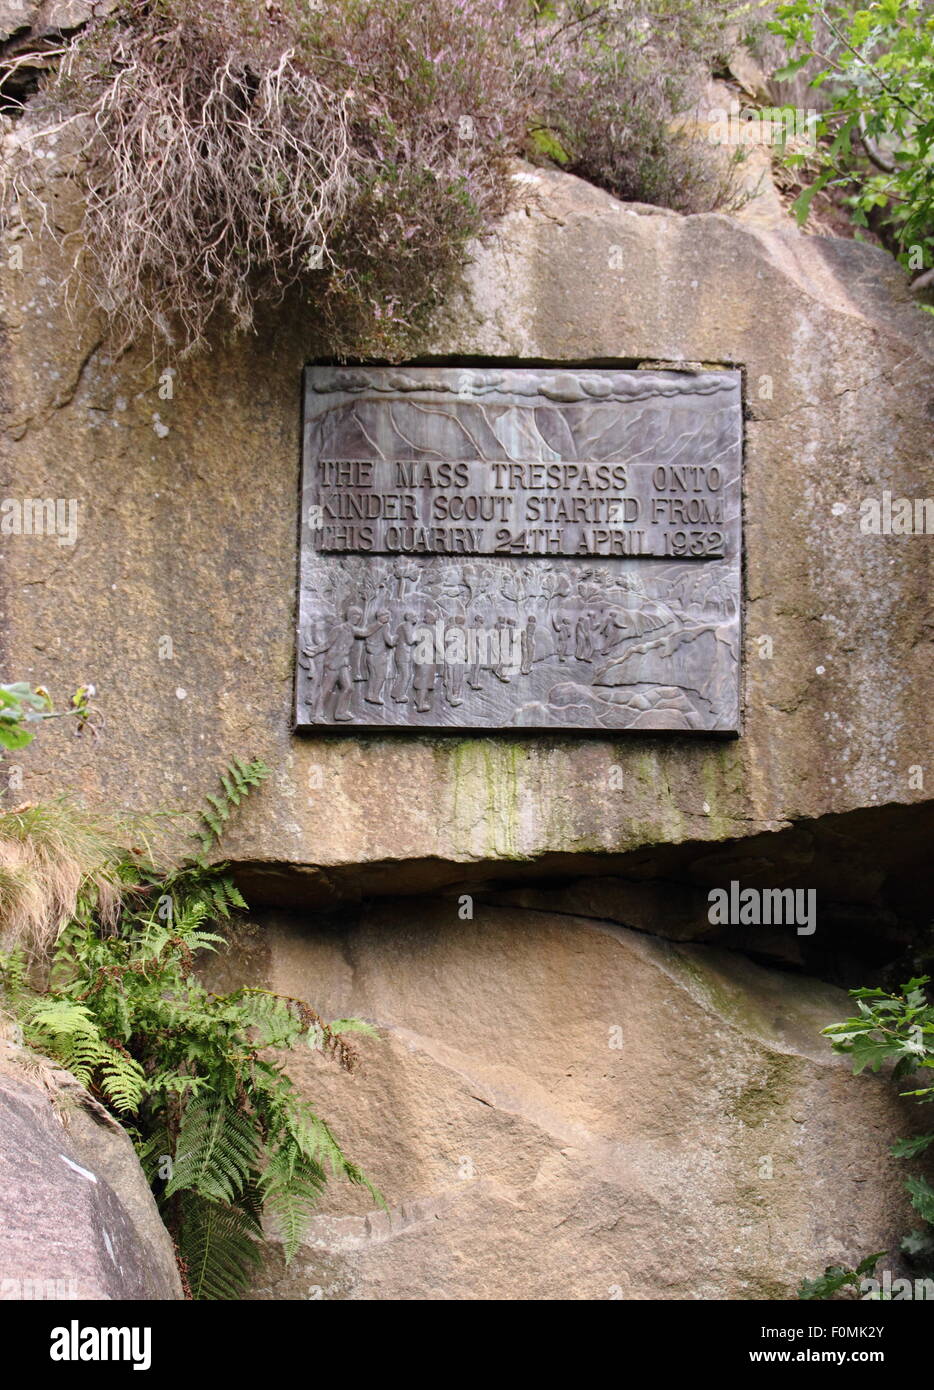 A plaque commemorating the mass trespass of kinder scout by walkers, Bowden Bridge quarry car park, near Hayfield, Derbyshire UK Stock Photo